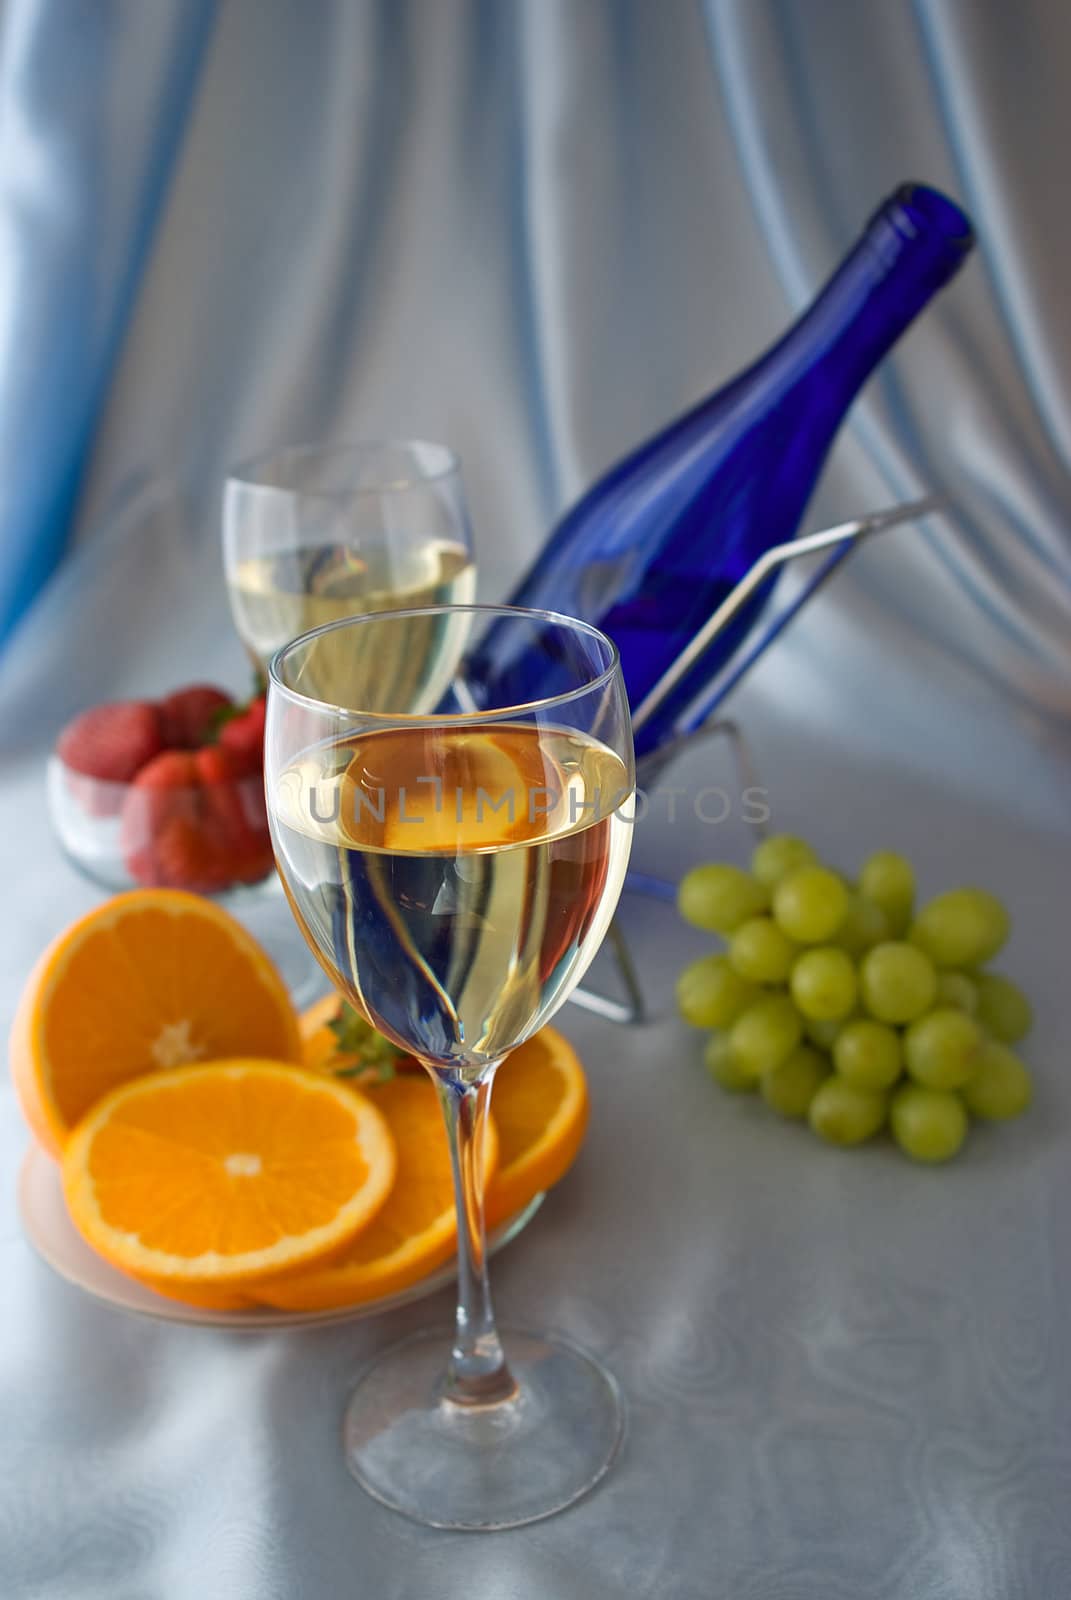 Glasses of wine with oranges and grapes